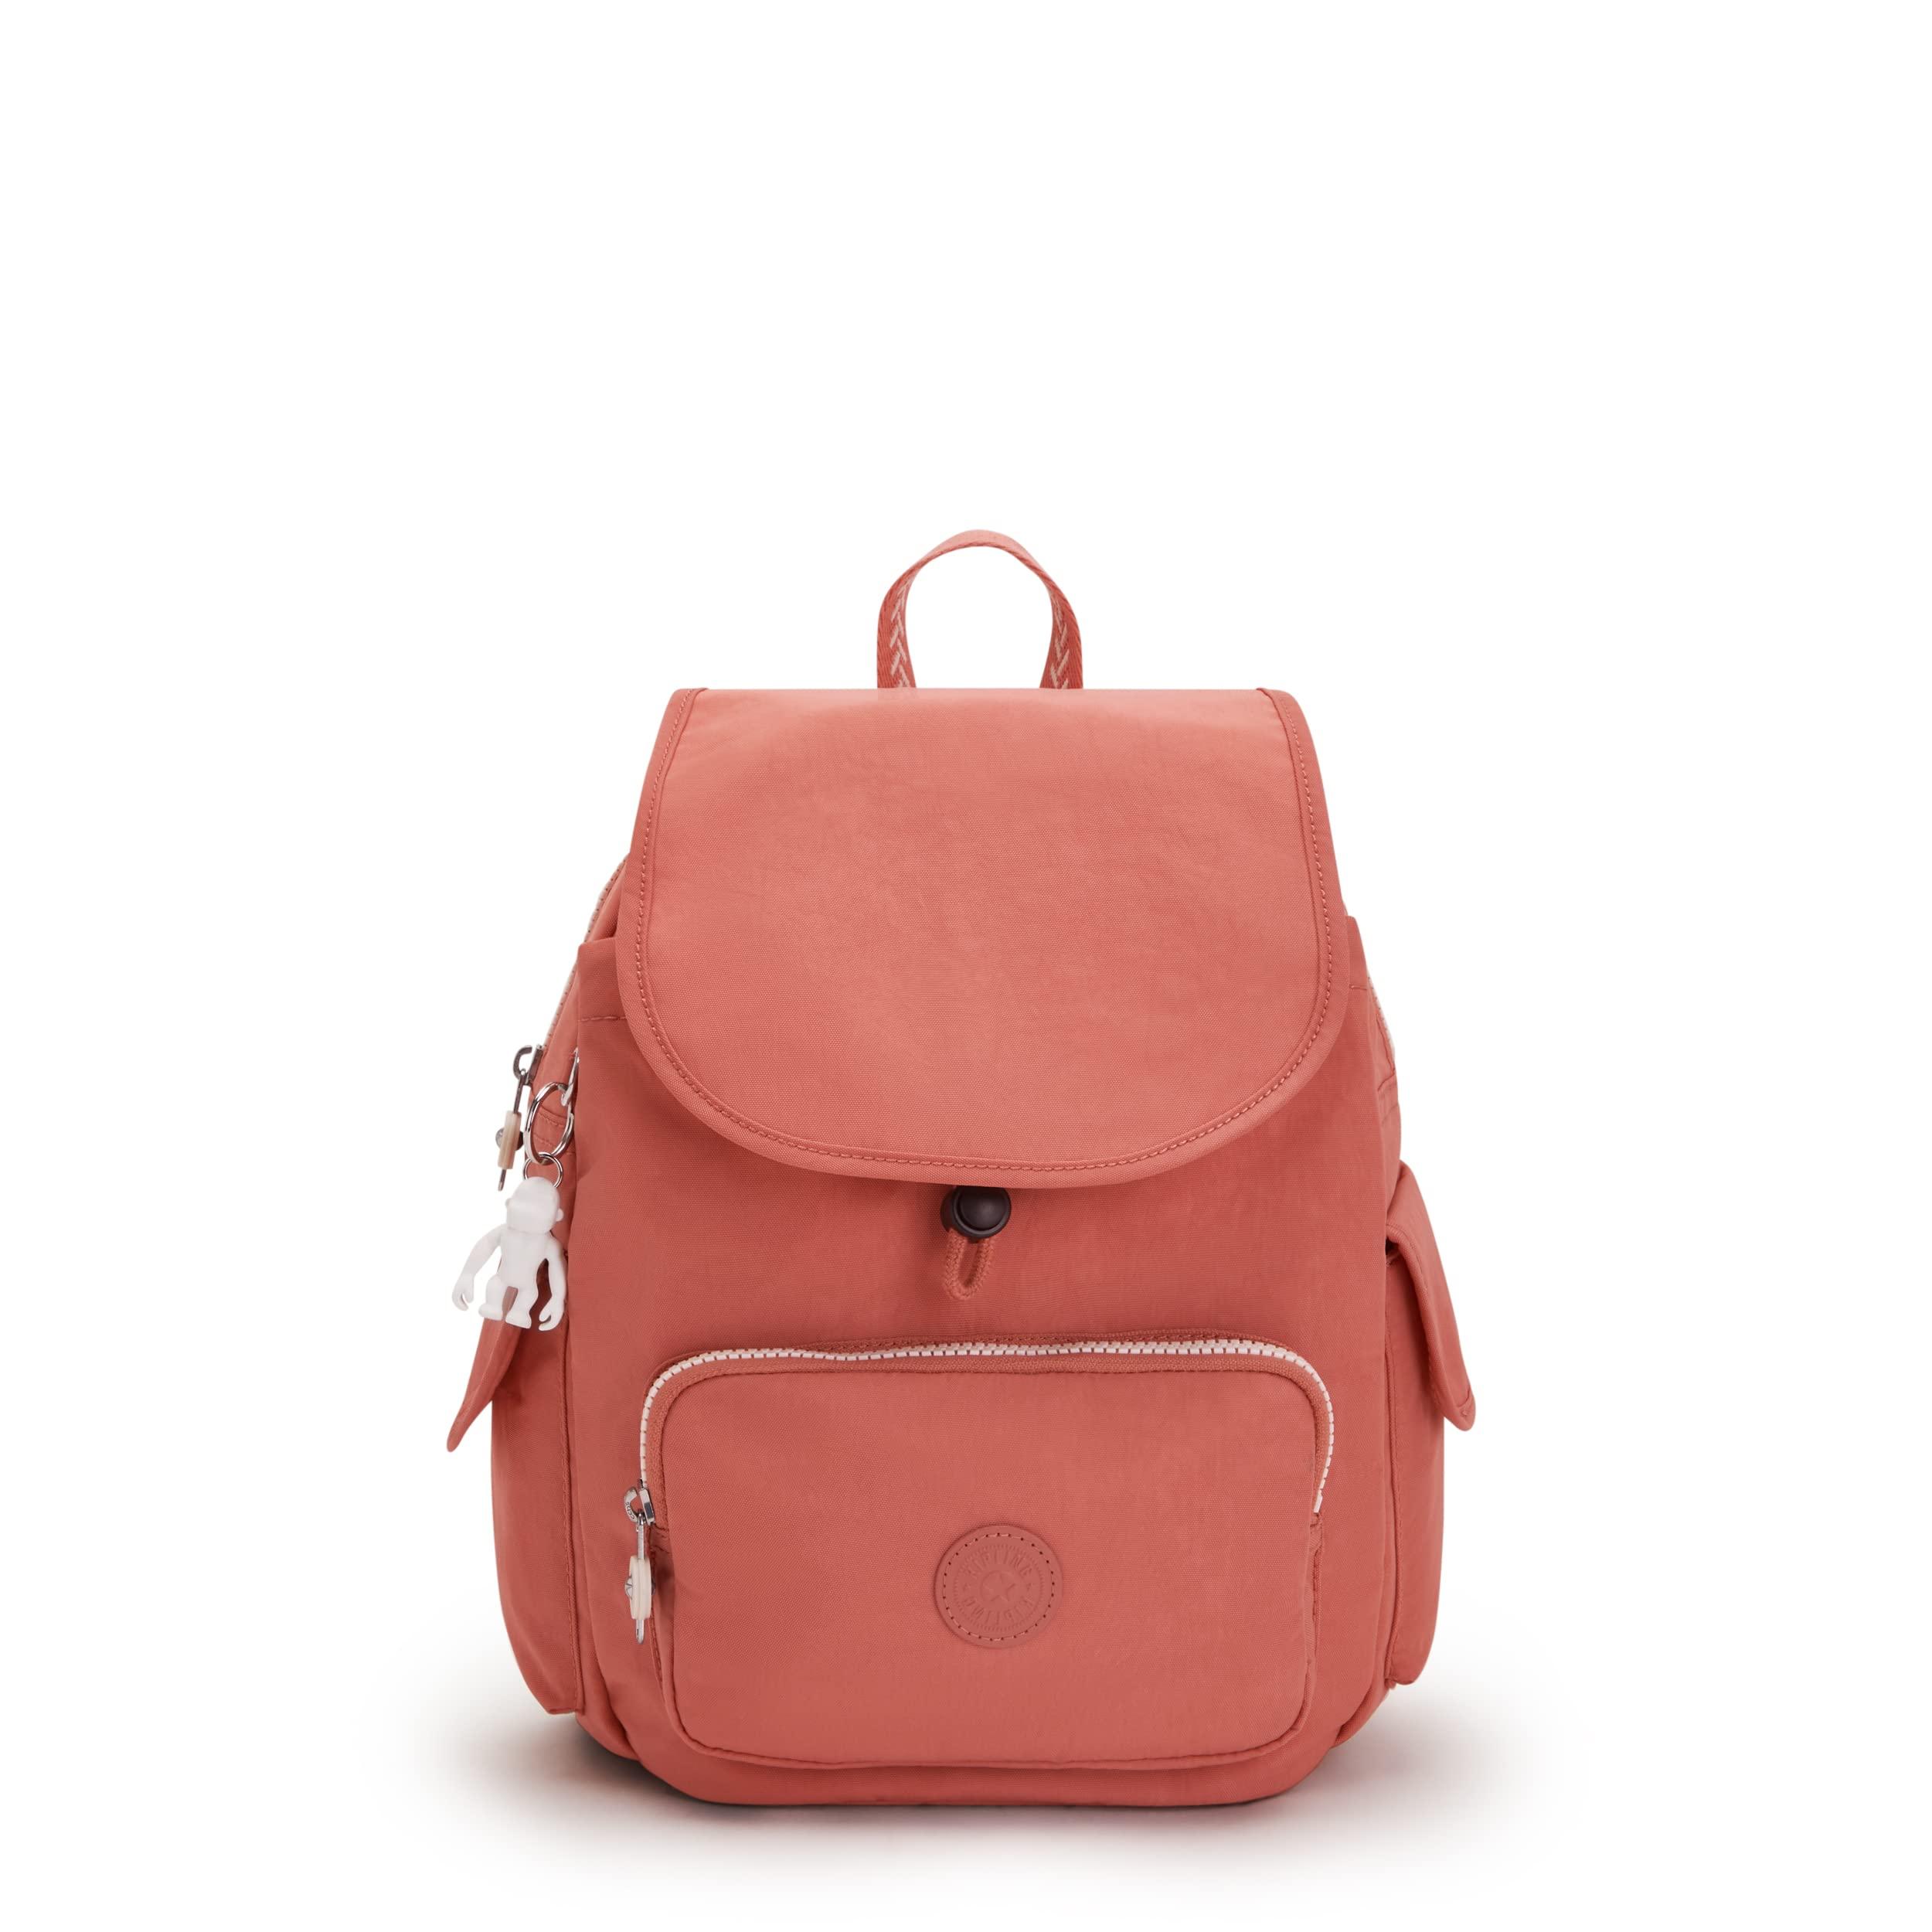 Kipling City Pack Small Backpack in Pink | Lyst